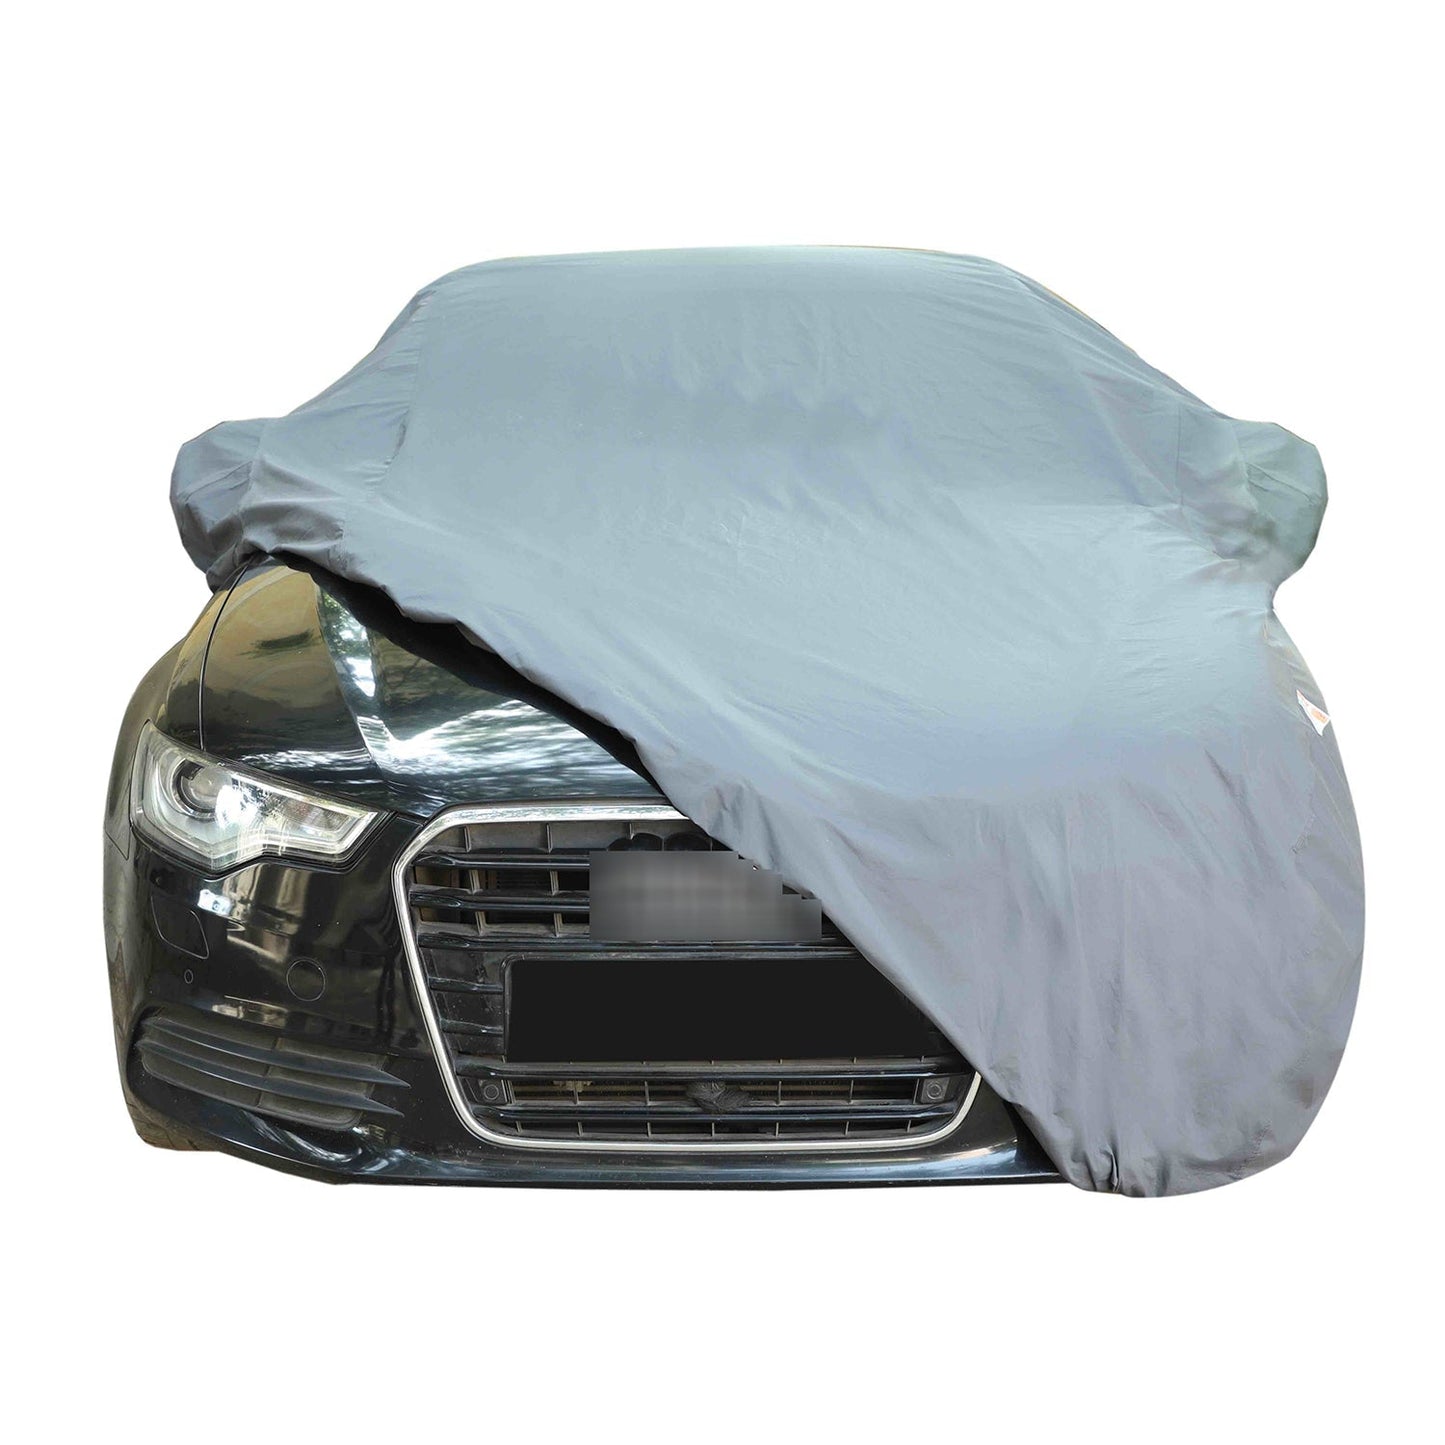 Oshotto Dark Grey 100% Anti Reflective, dustproof and Water Proof Car Body Cover with Mirror Pockets For Audi A7